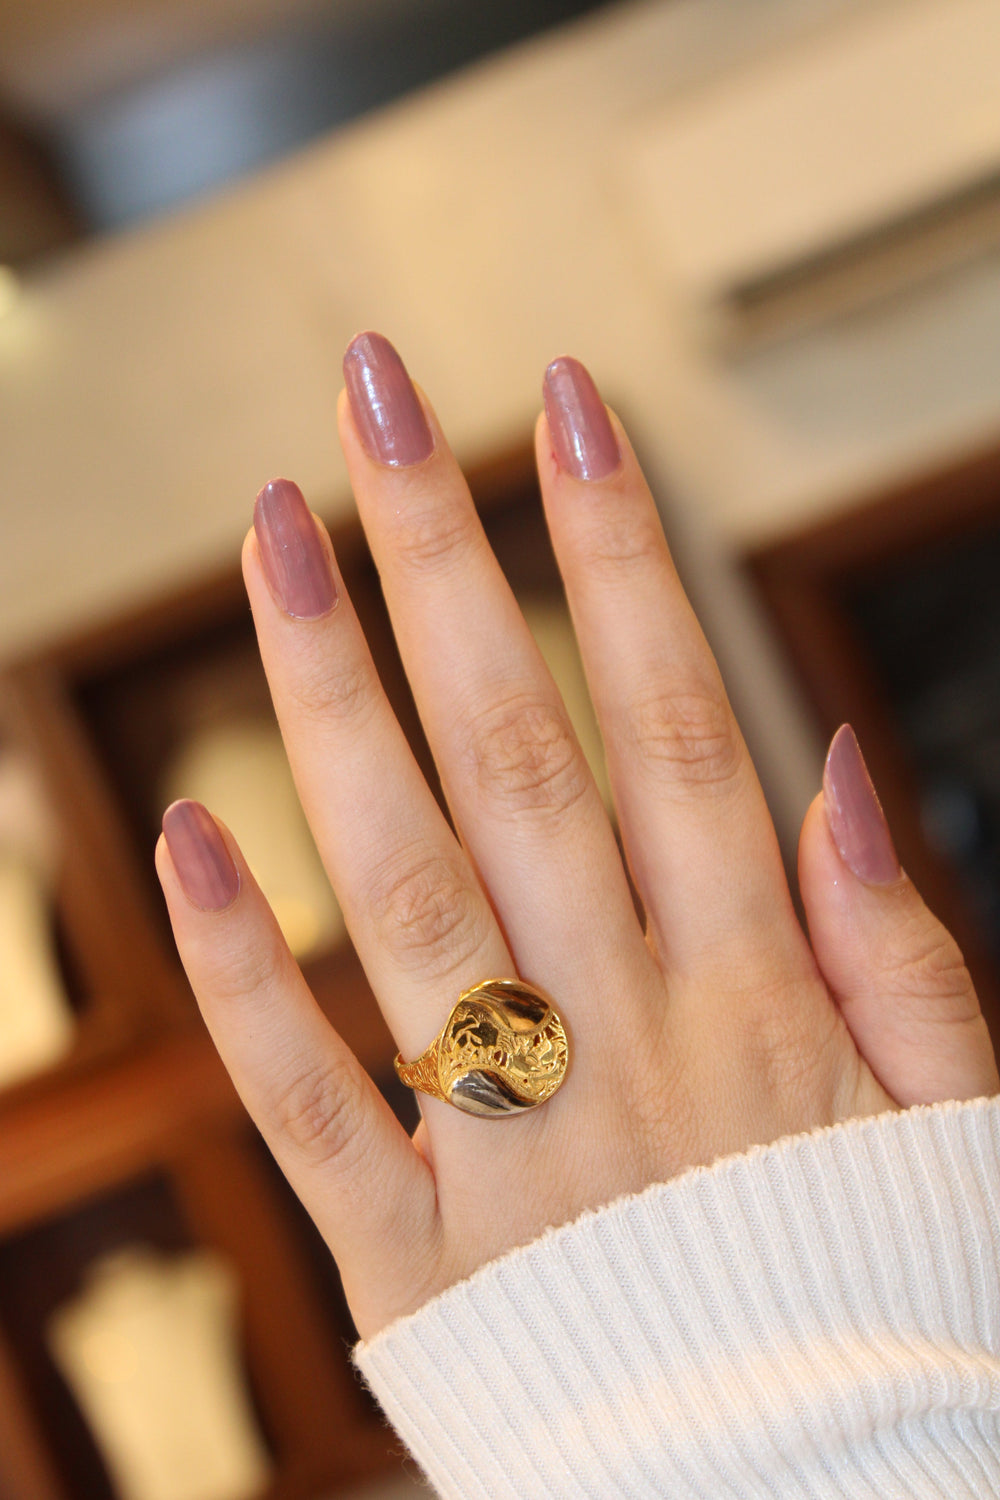 21K Fancy Ring Made of 21K Yellow Gold by Saeed Jewelry-18417